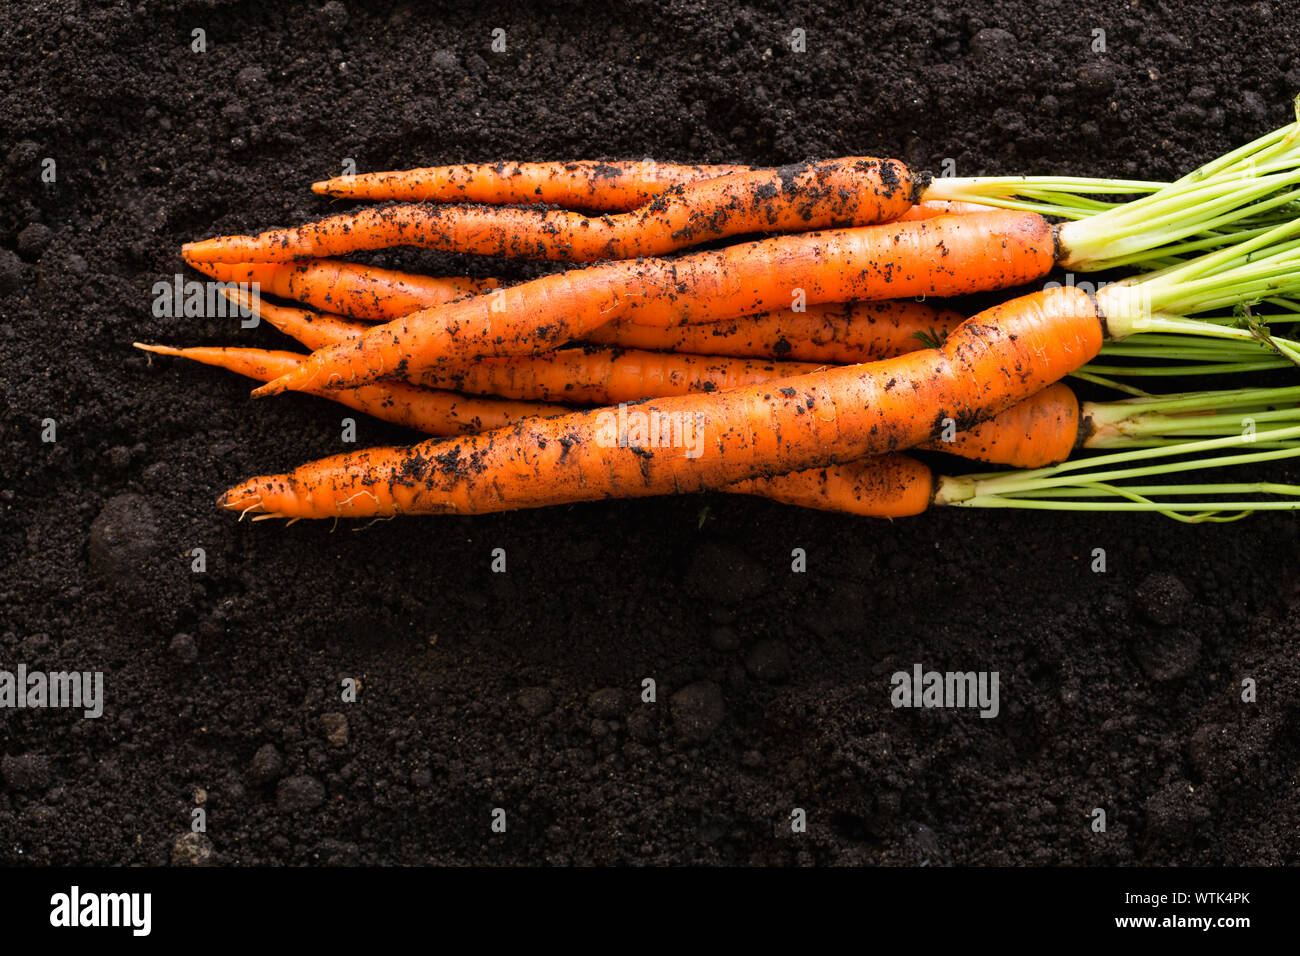 Bunch of fresh carrots on dirt Stock Photo